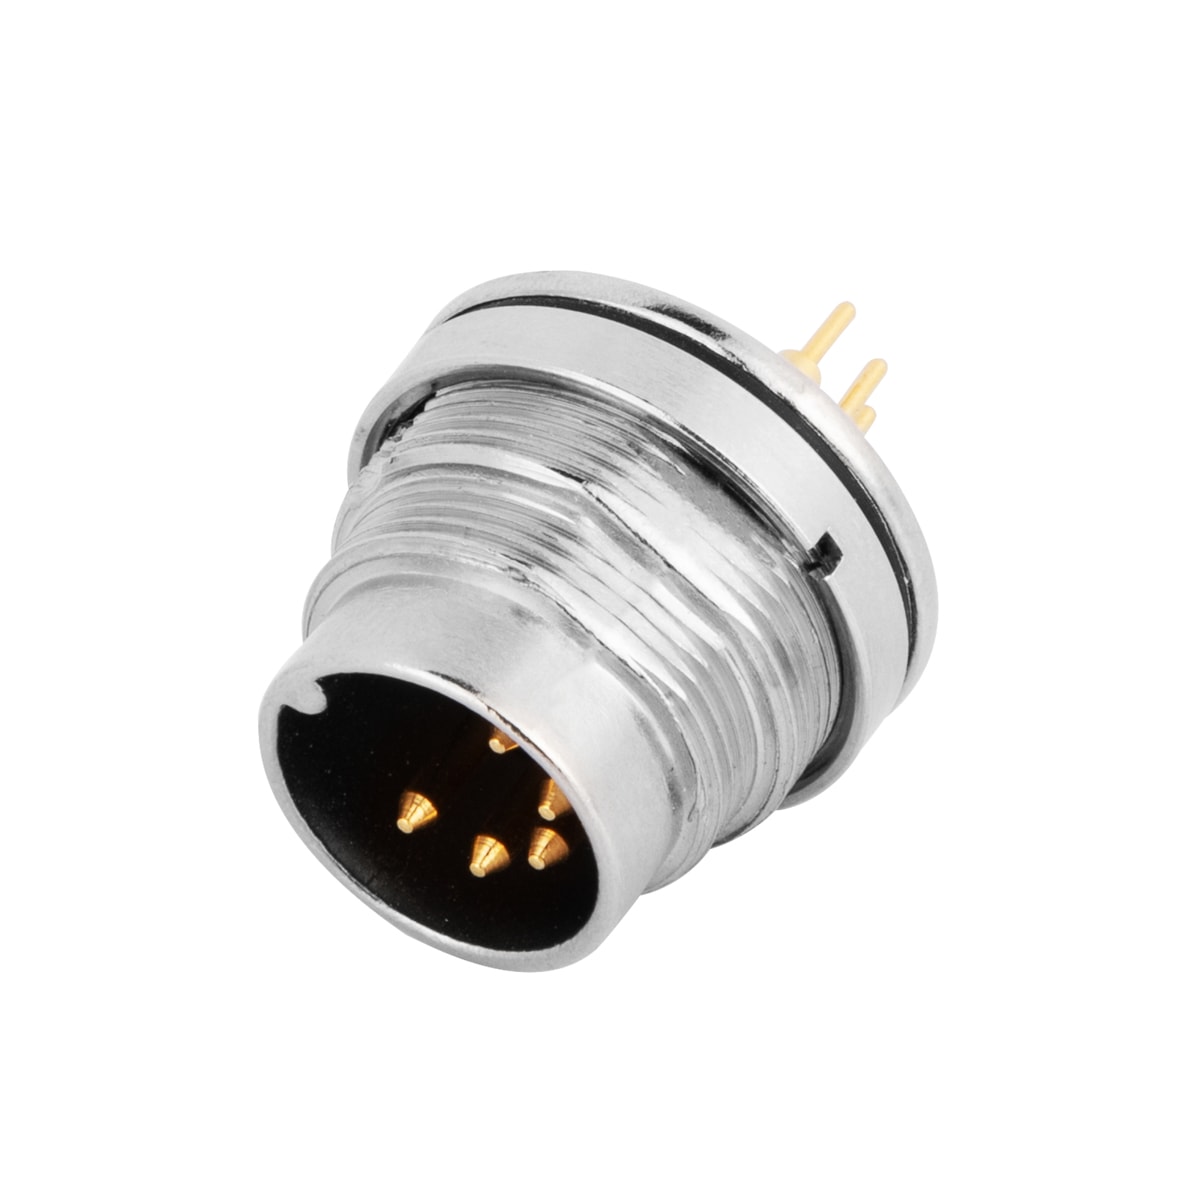 M16 panel receptacle, rear mount, male, contacts:7, PCB dip-solder connection, straight, IP67, UL certified